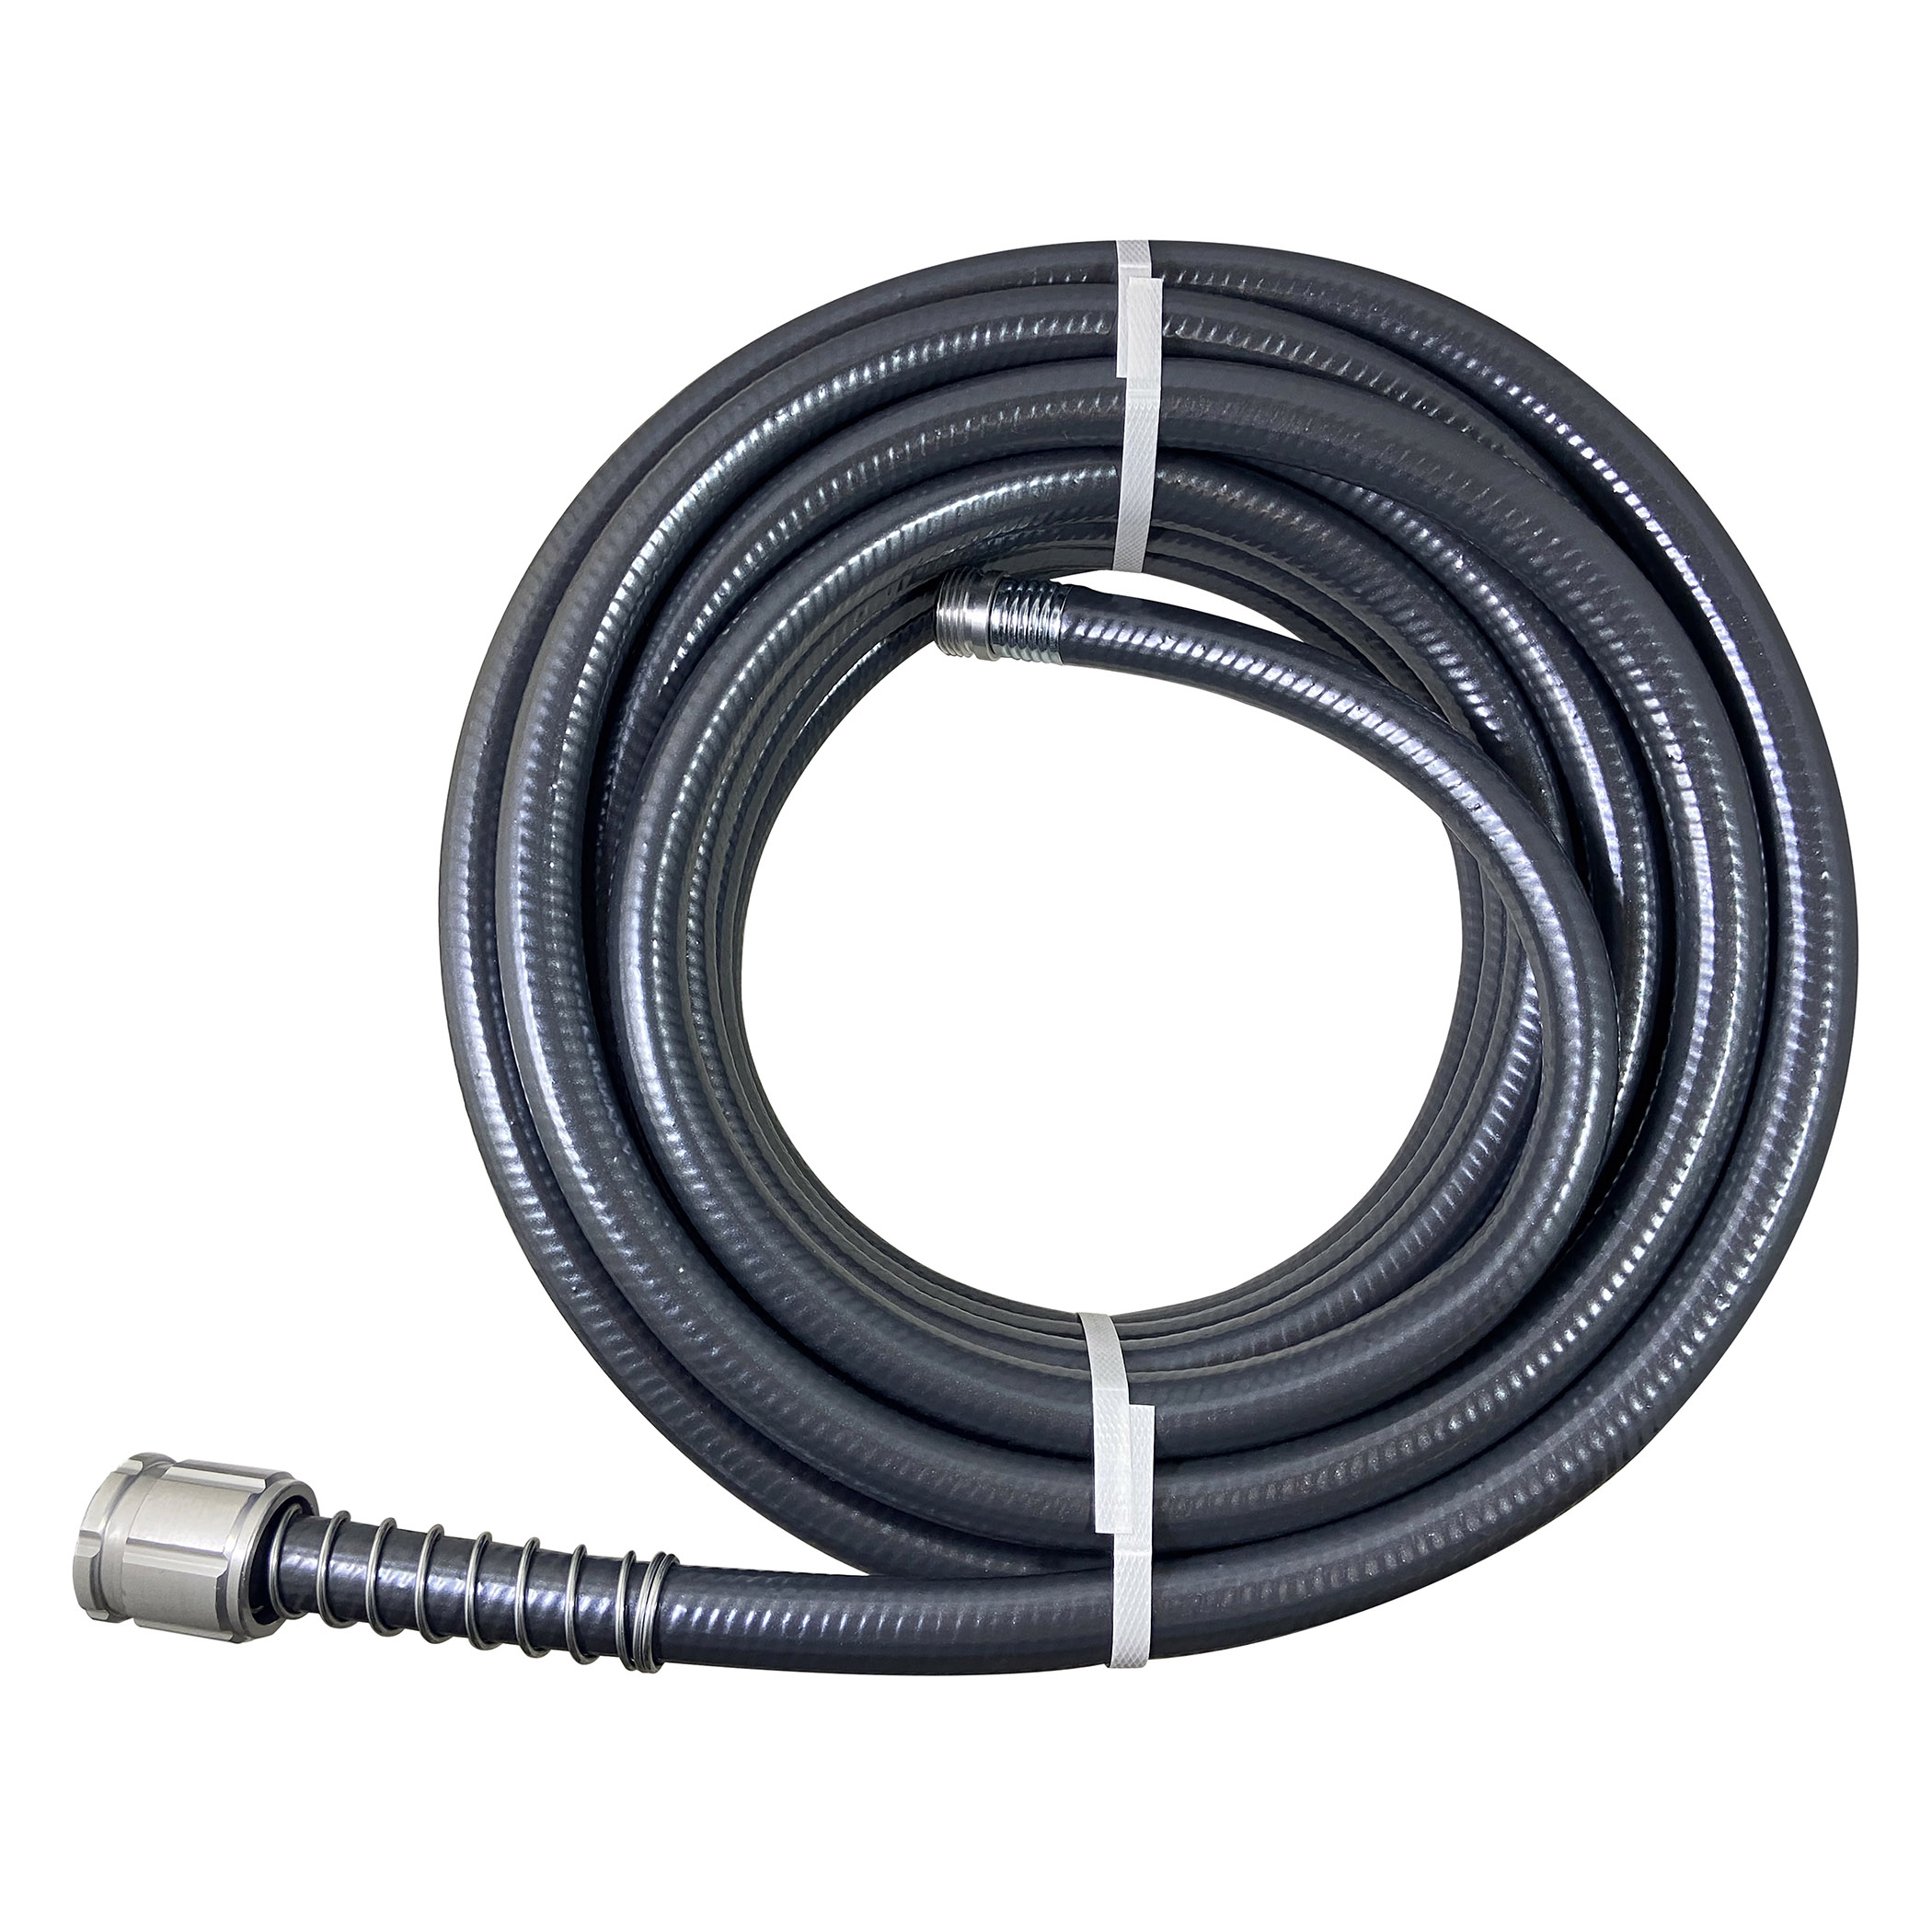 Fevone Garden Hose 100 ft x 5/8, Heavy Duty Water Hose, Flexible and  Lightweight, Hybrid Hose Kink Free, Easy to Coil, Solid Aluminum Fittings -  No